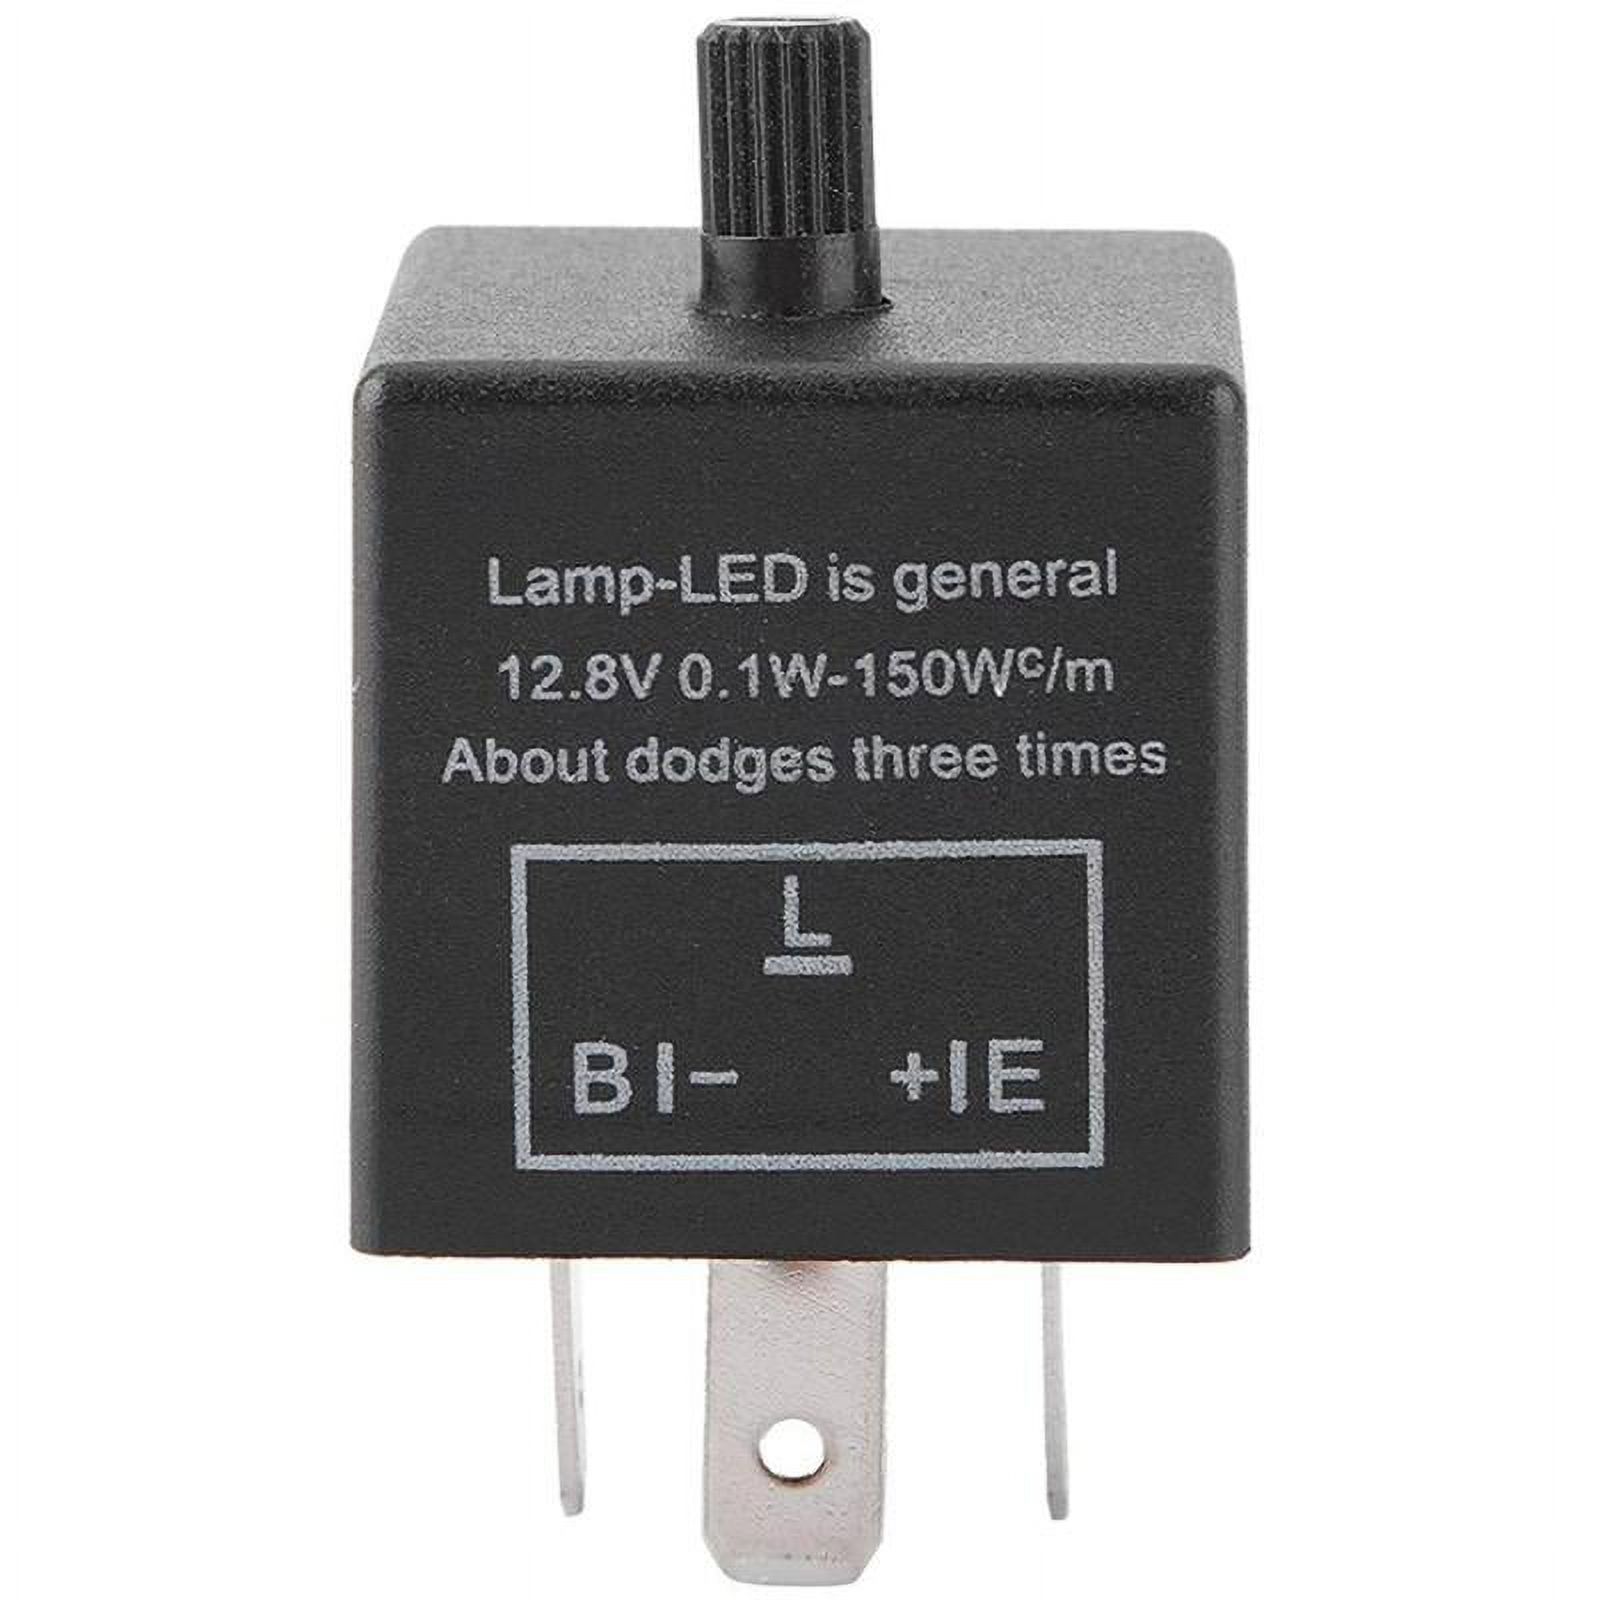 Electronic LED Adjustable Flasher Relay For Turn Signal A1T0 Light Blinker U4C4 - image 1 of 9